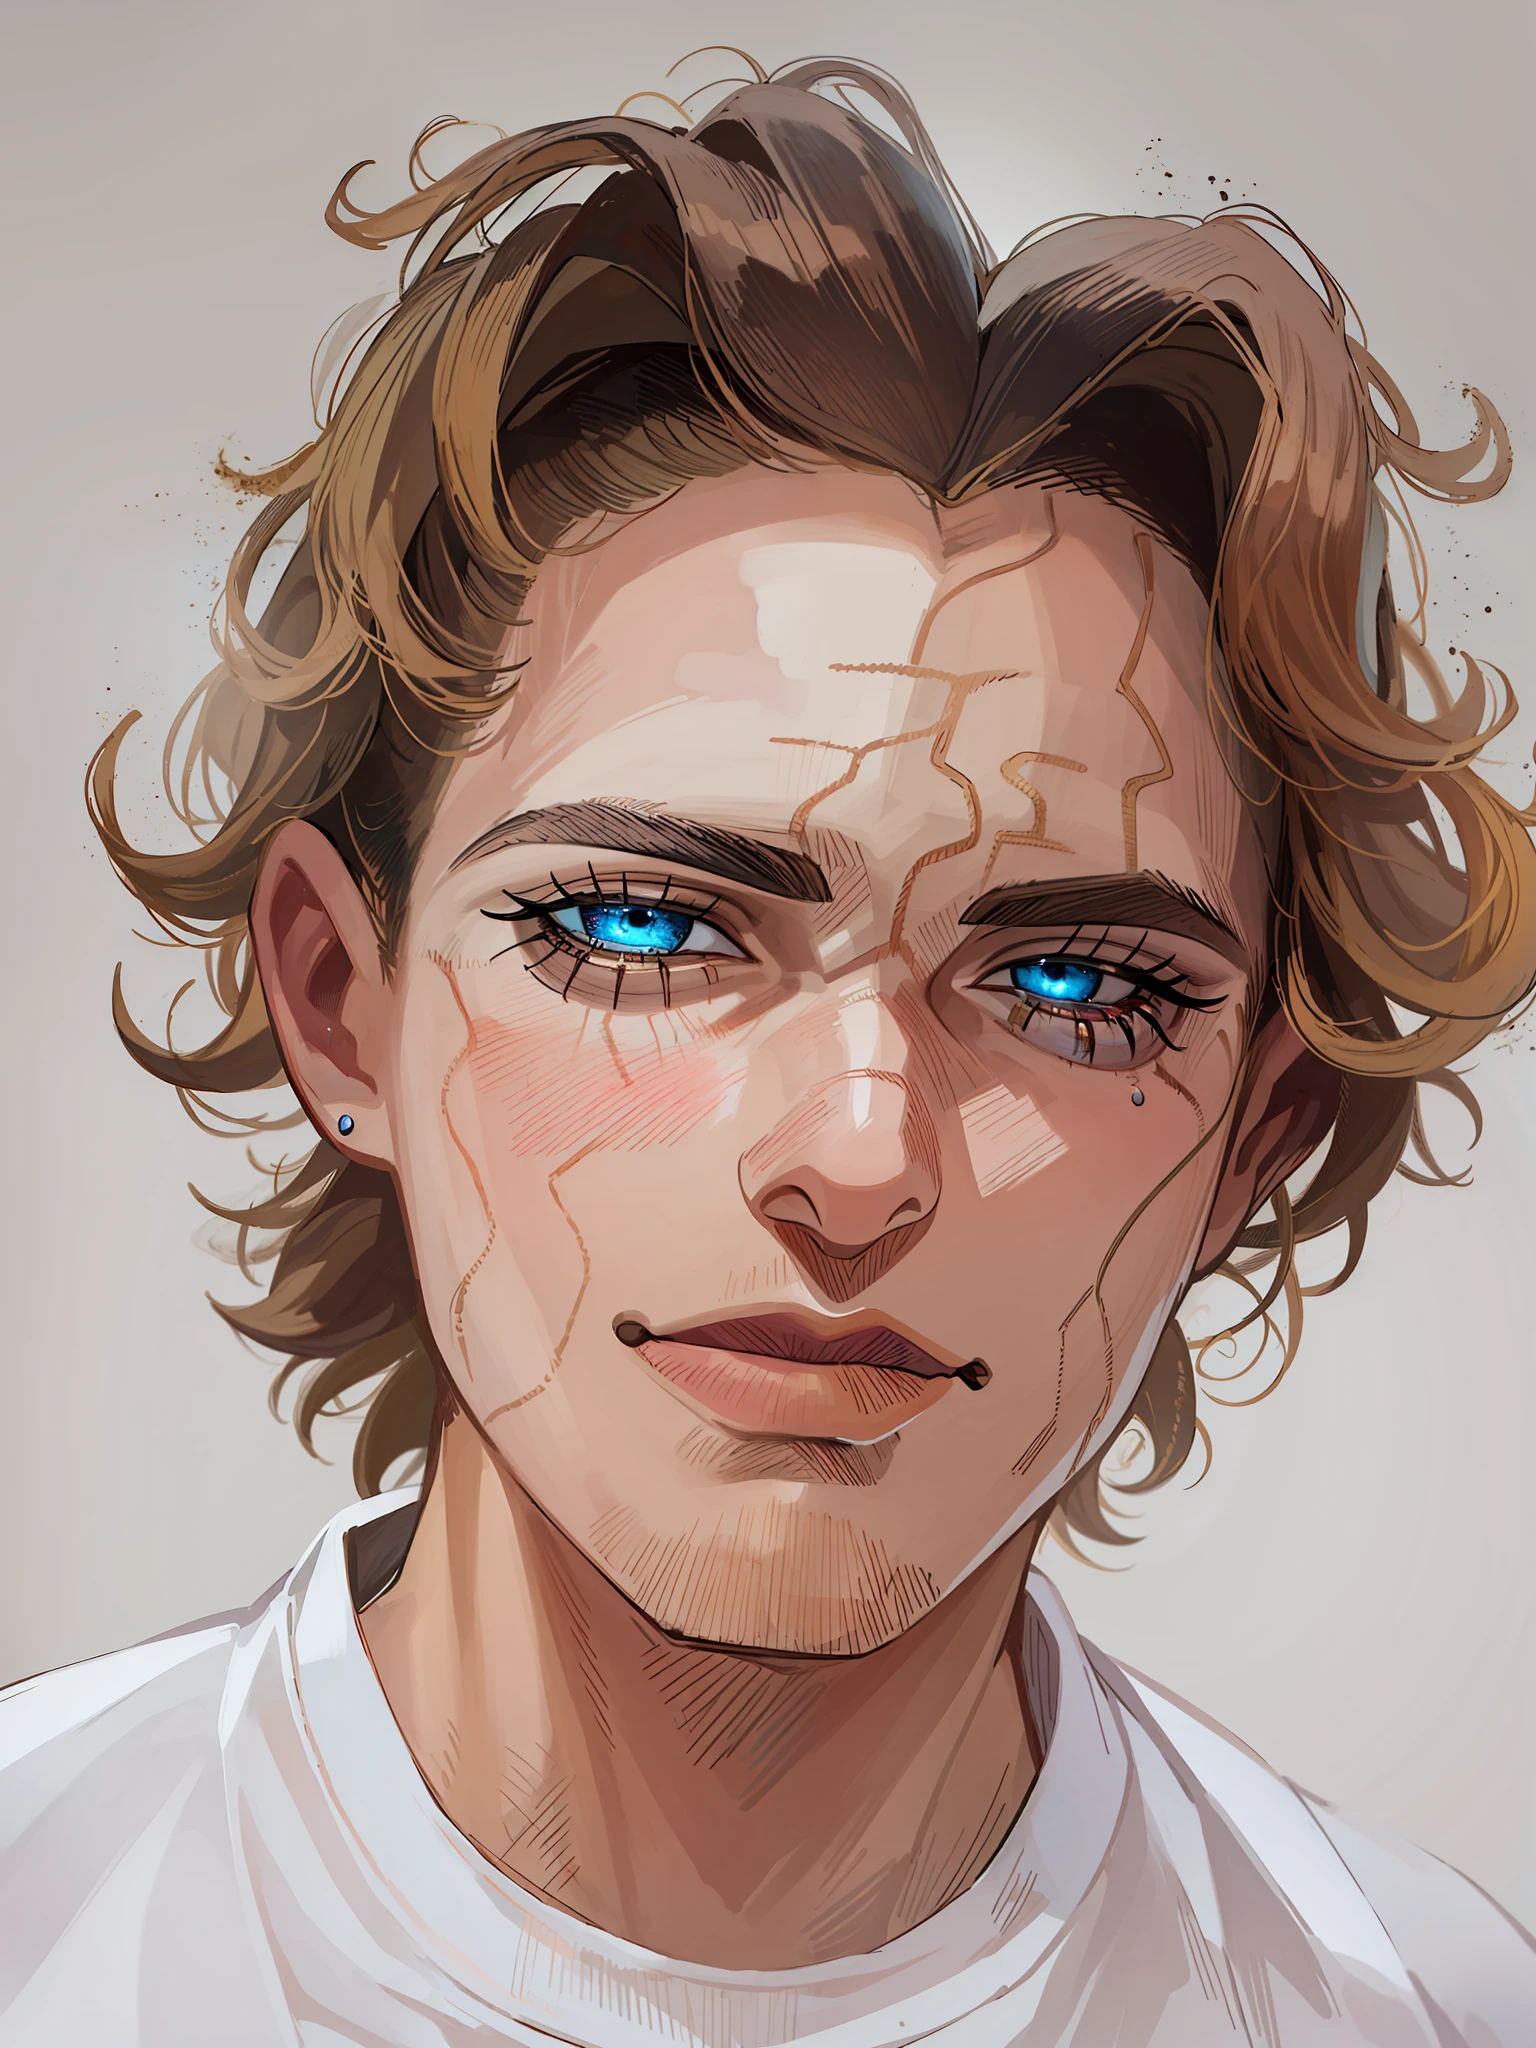 HD, (Best Detail) (Best Quality), Meticulous Eyes, Meticulous Facial Features, Arad Man with White Shirt and White Shirt, (JOJO), Yuhiko Araki